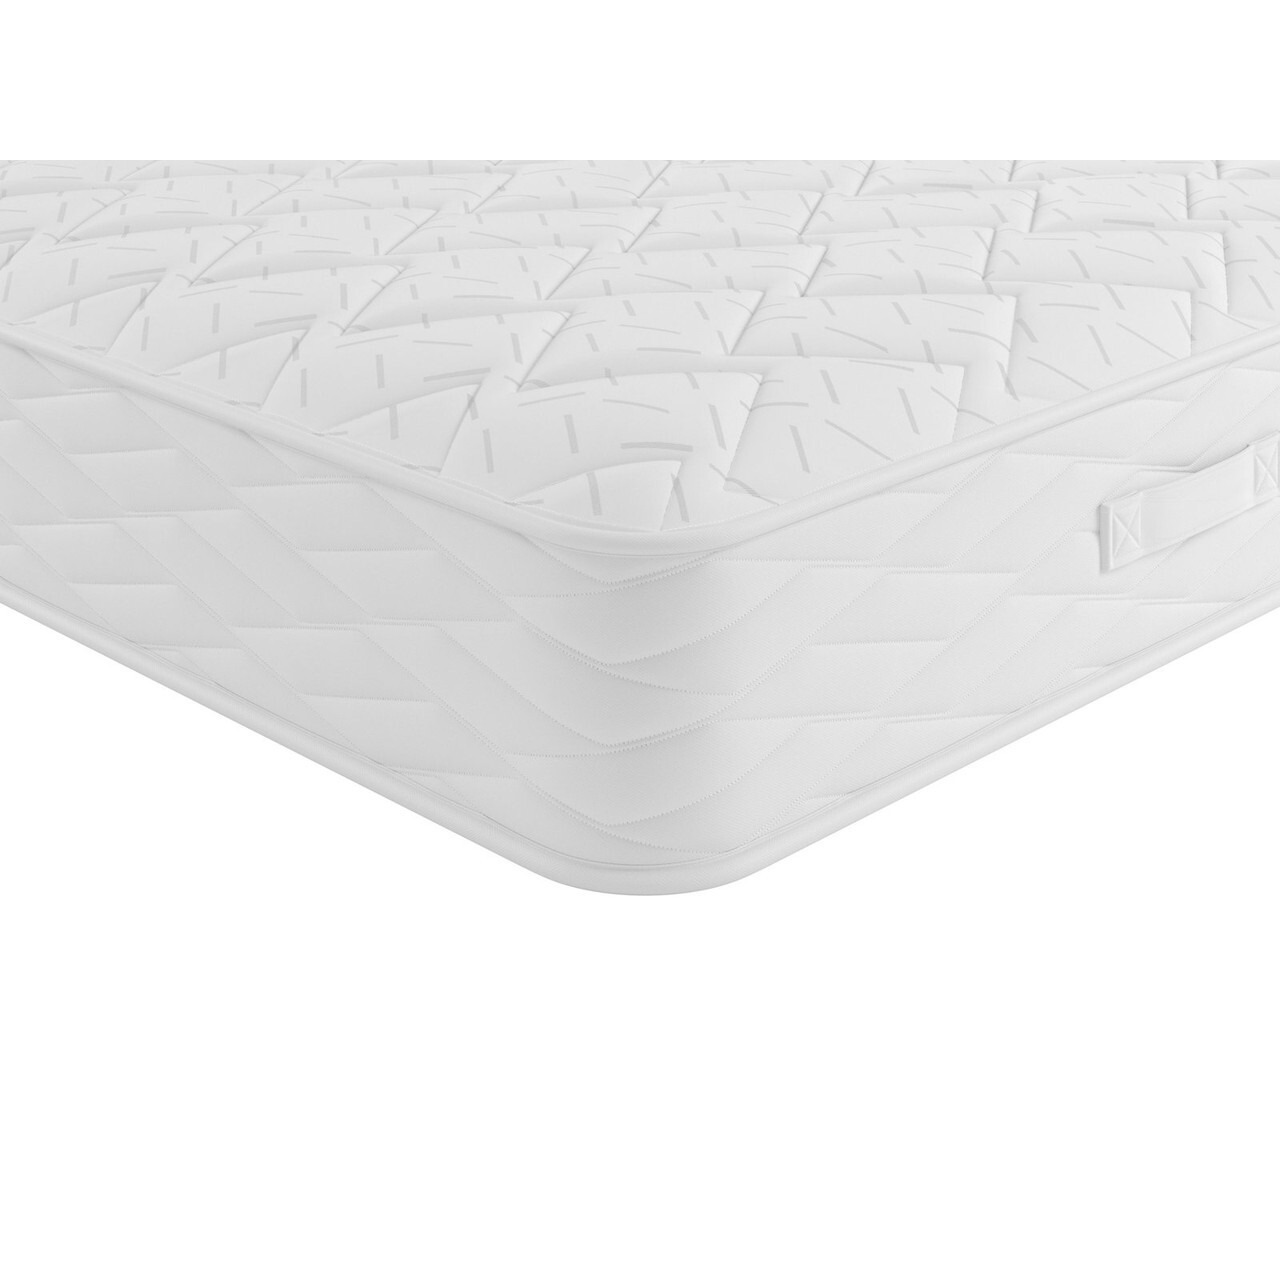 Simply By Bensons Calm Mattress - image 1